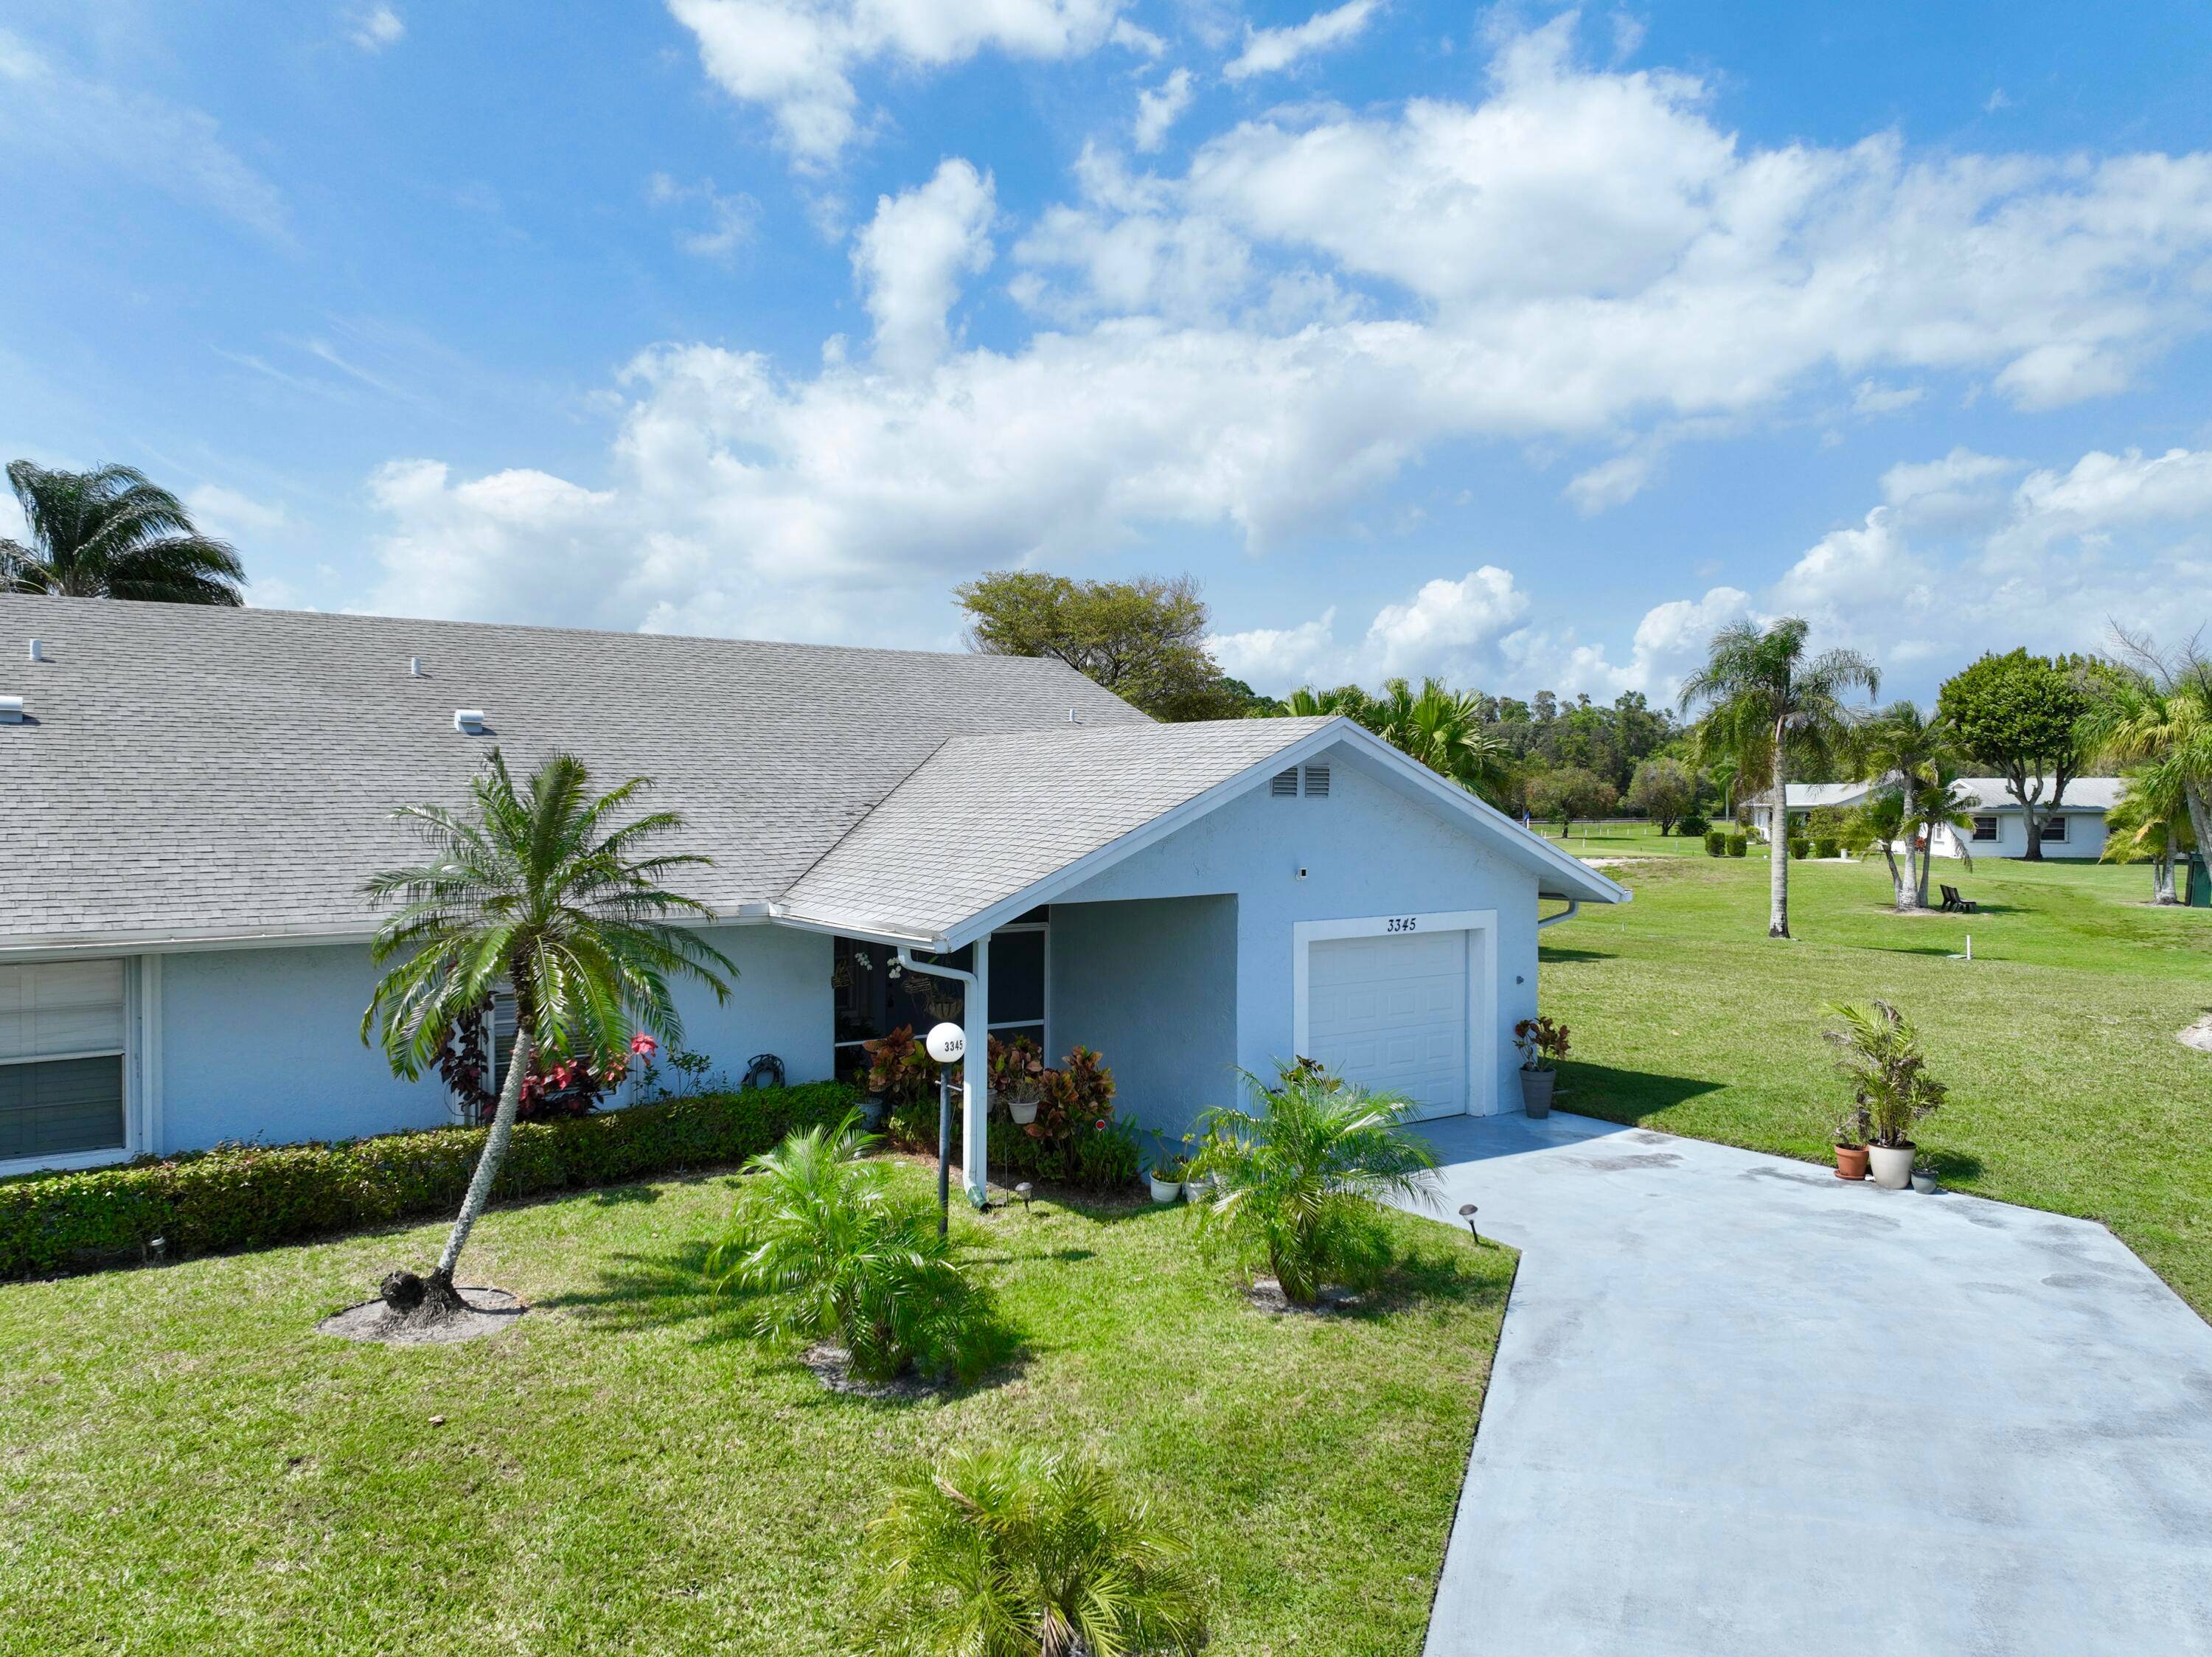 An excellent opportunity to live in one of the most beautiful 55 communities in South Florida.